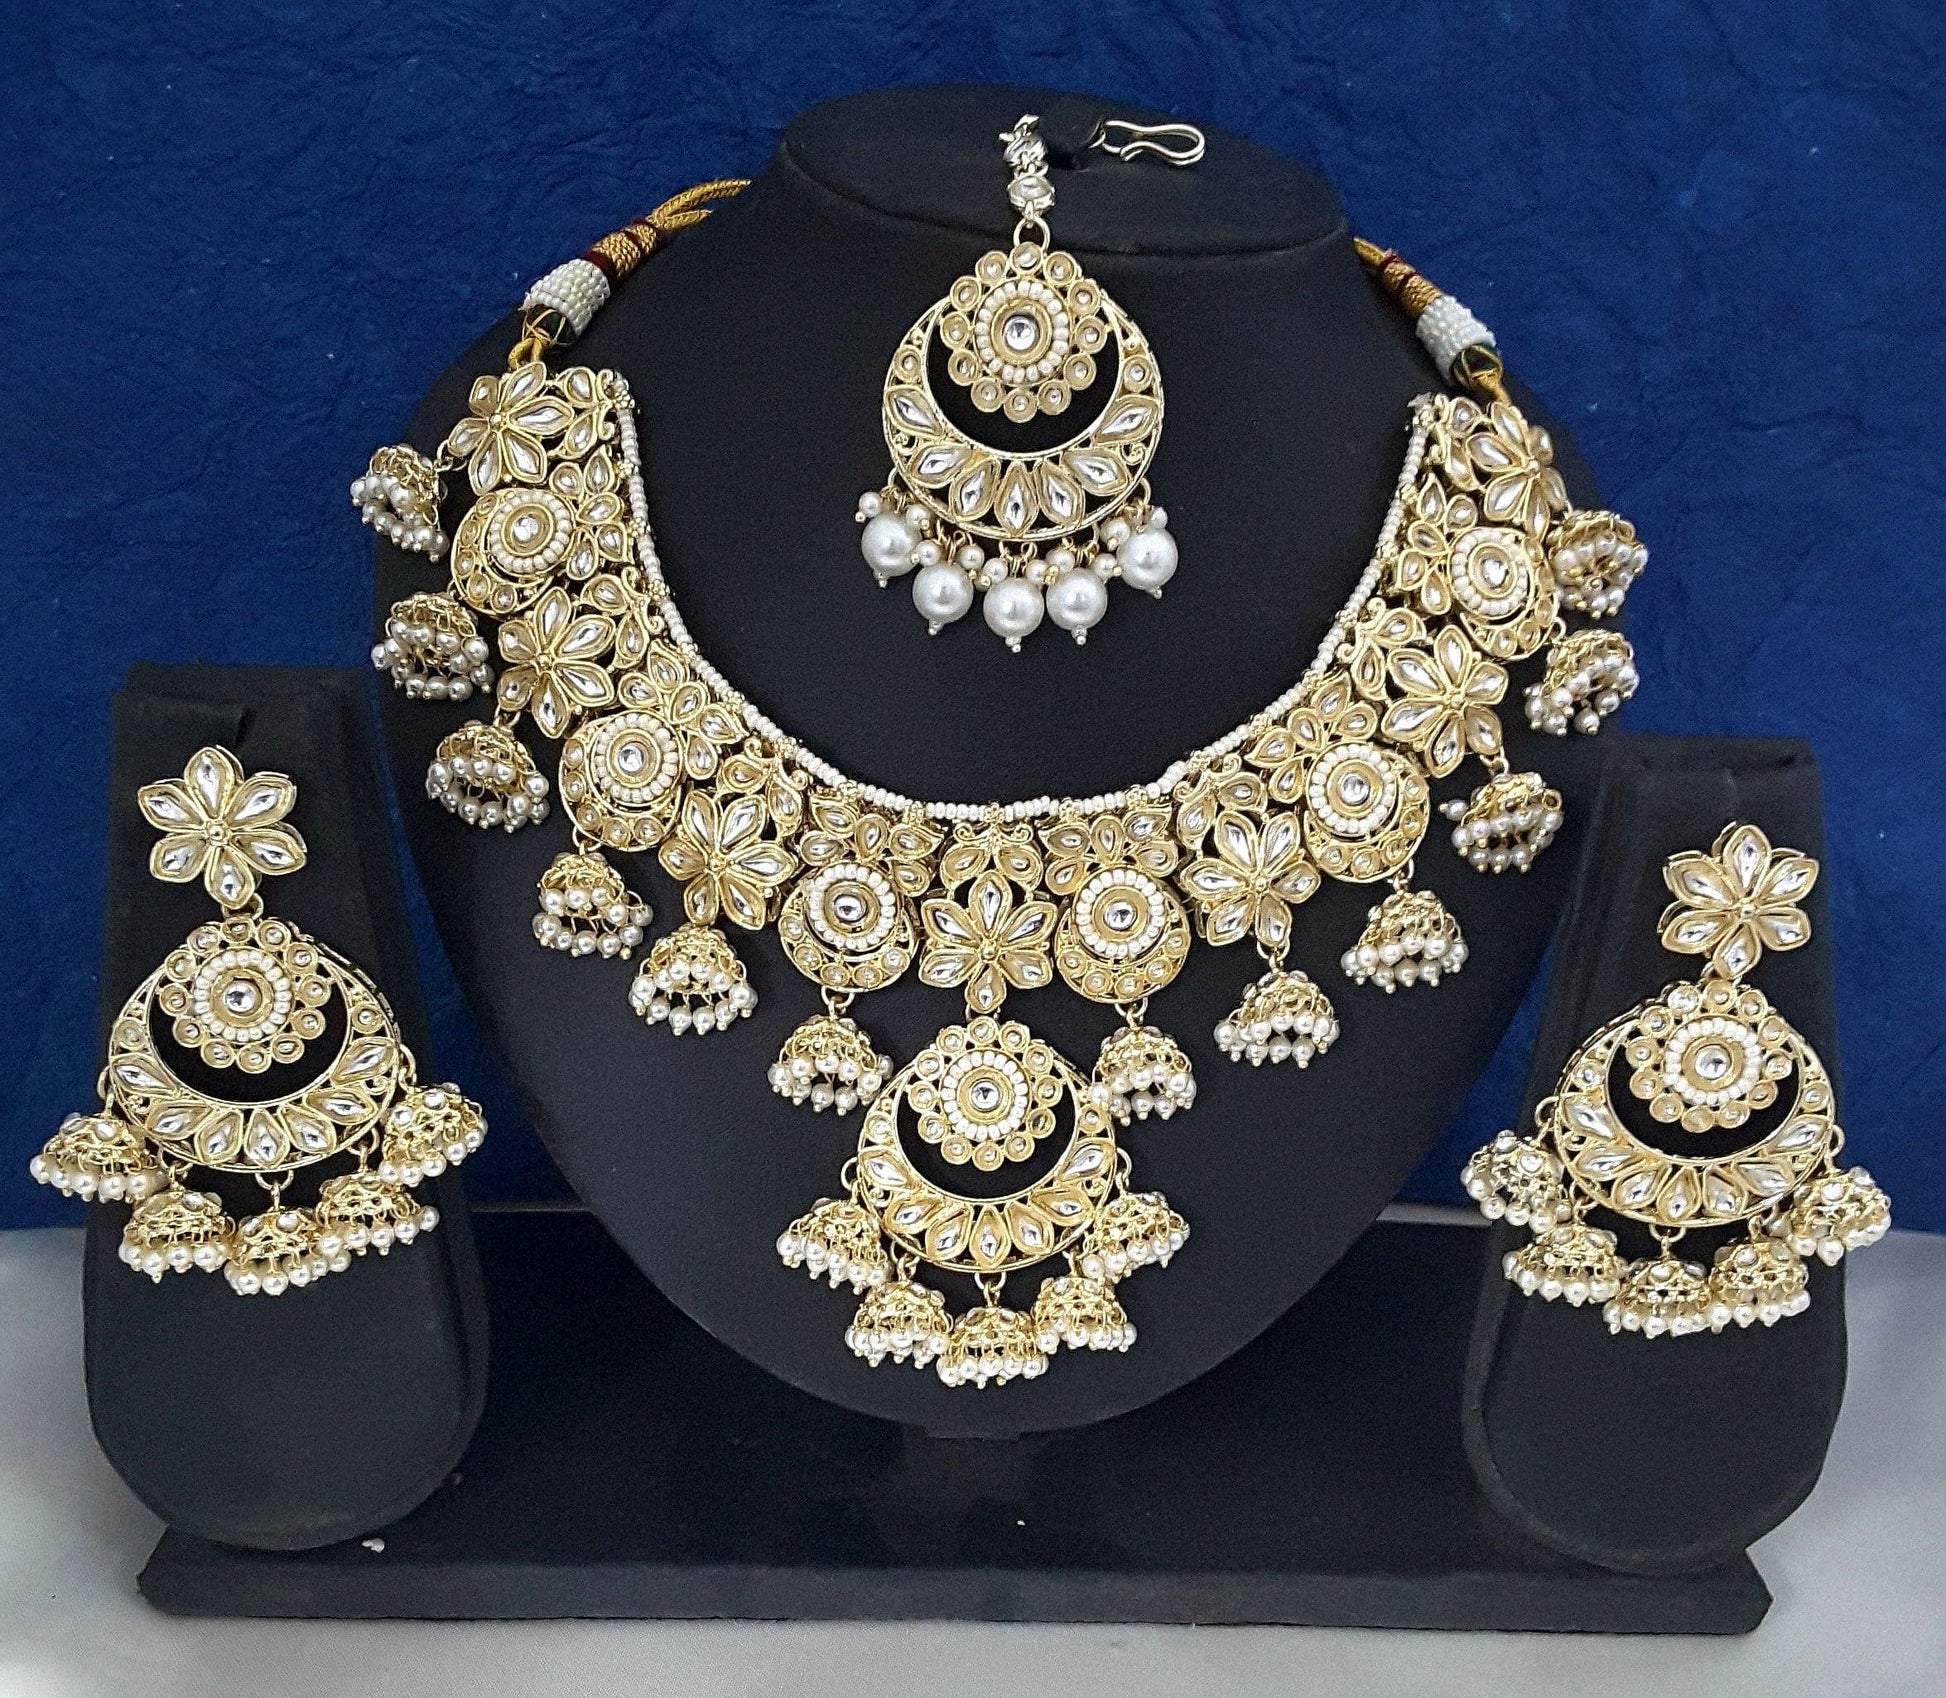 Moonstruck Traditional Indian White Kundan and Pearls Choker Necklace Earring Set with Maang Tikka for Women(White) - www.MoonstruckINC.com